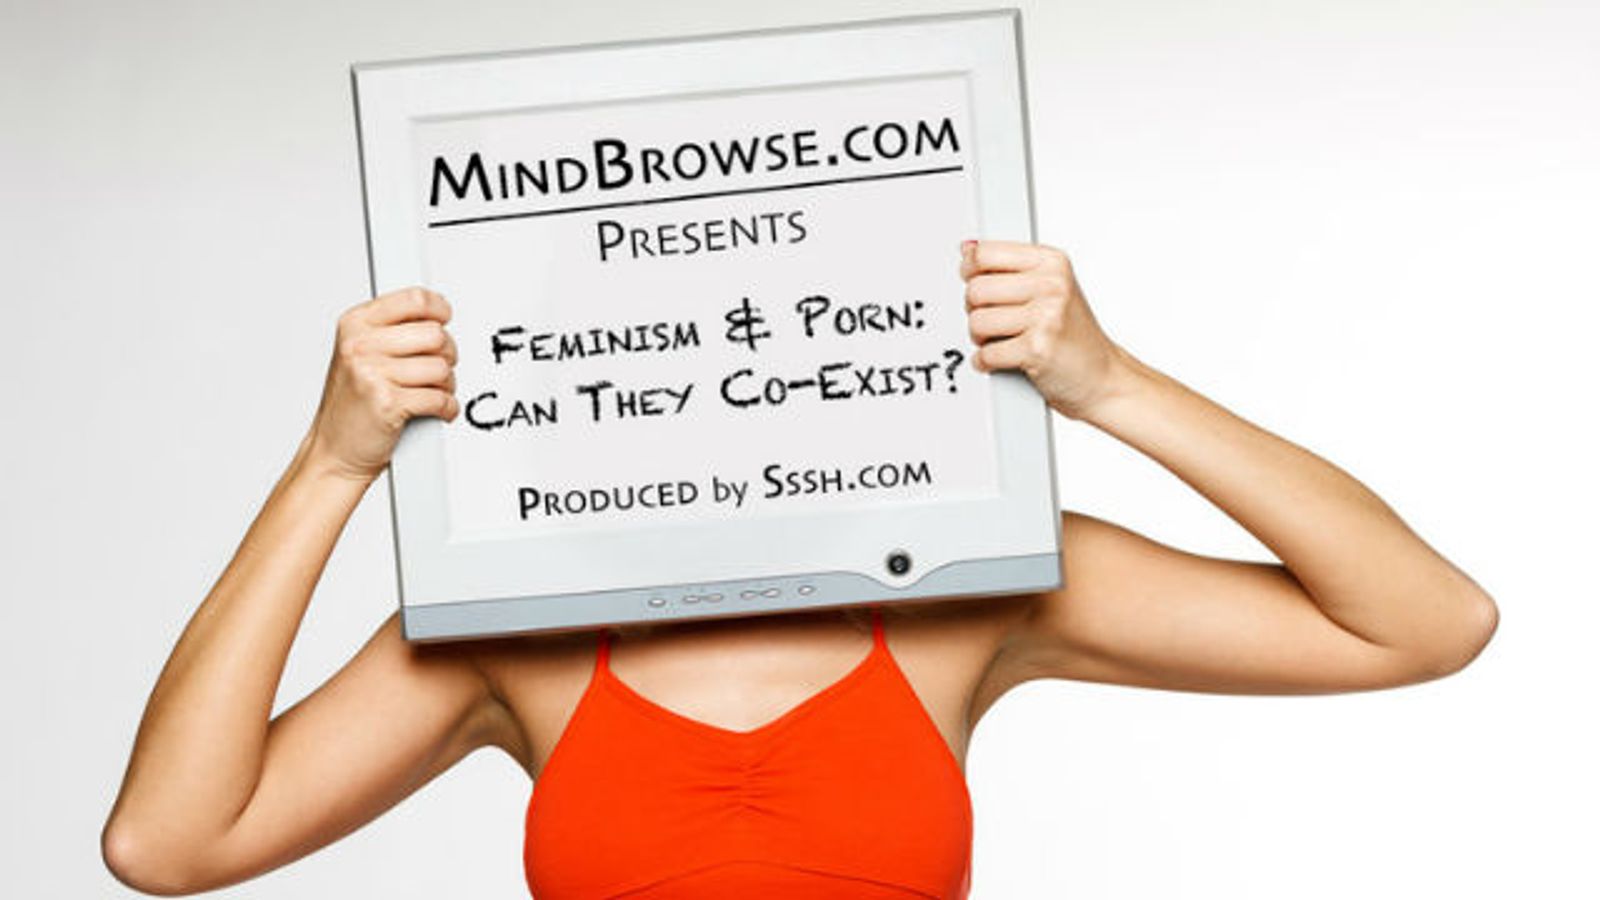 Dana Vespoli Joins Sept. 30 Panel on 'Feminism and Porn: Can They Coexist?'